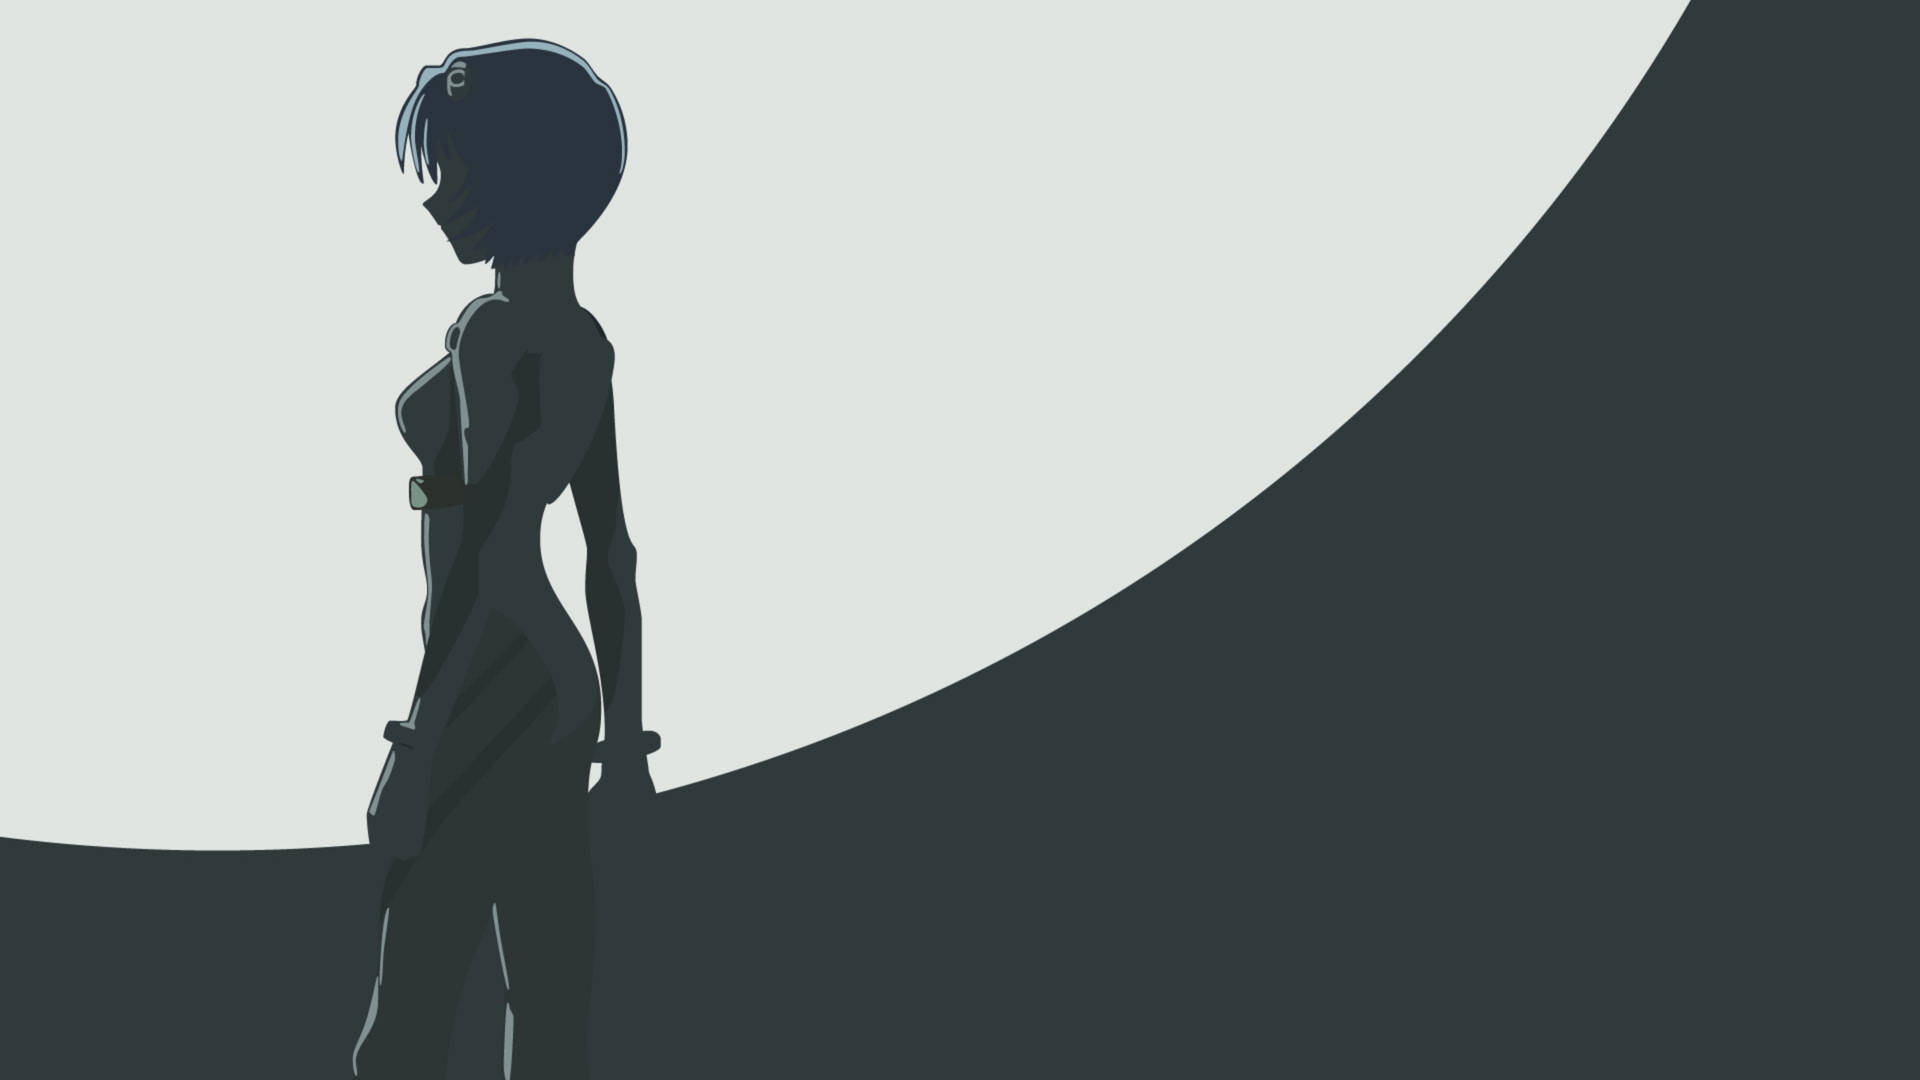 Evangelion4k Rei Silhouette Would Be Translated In German As 